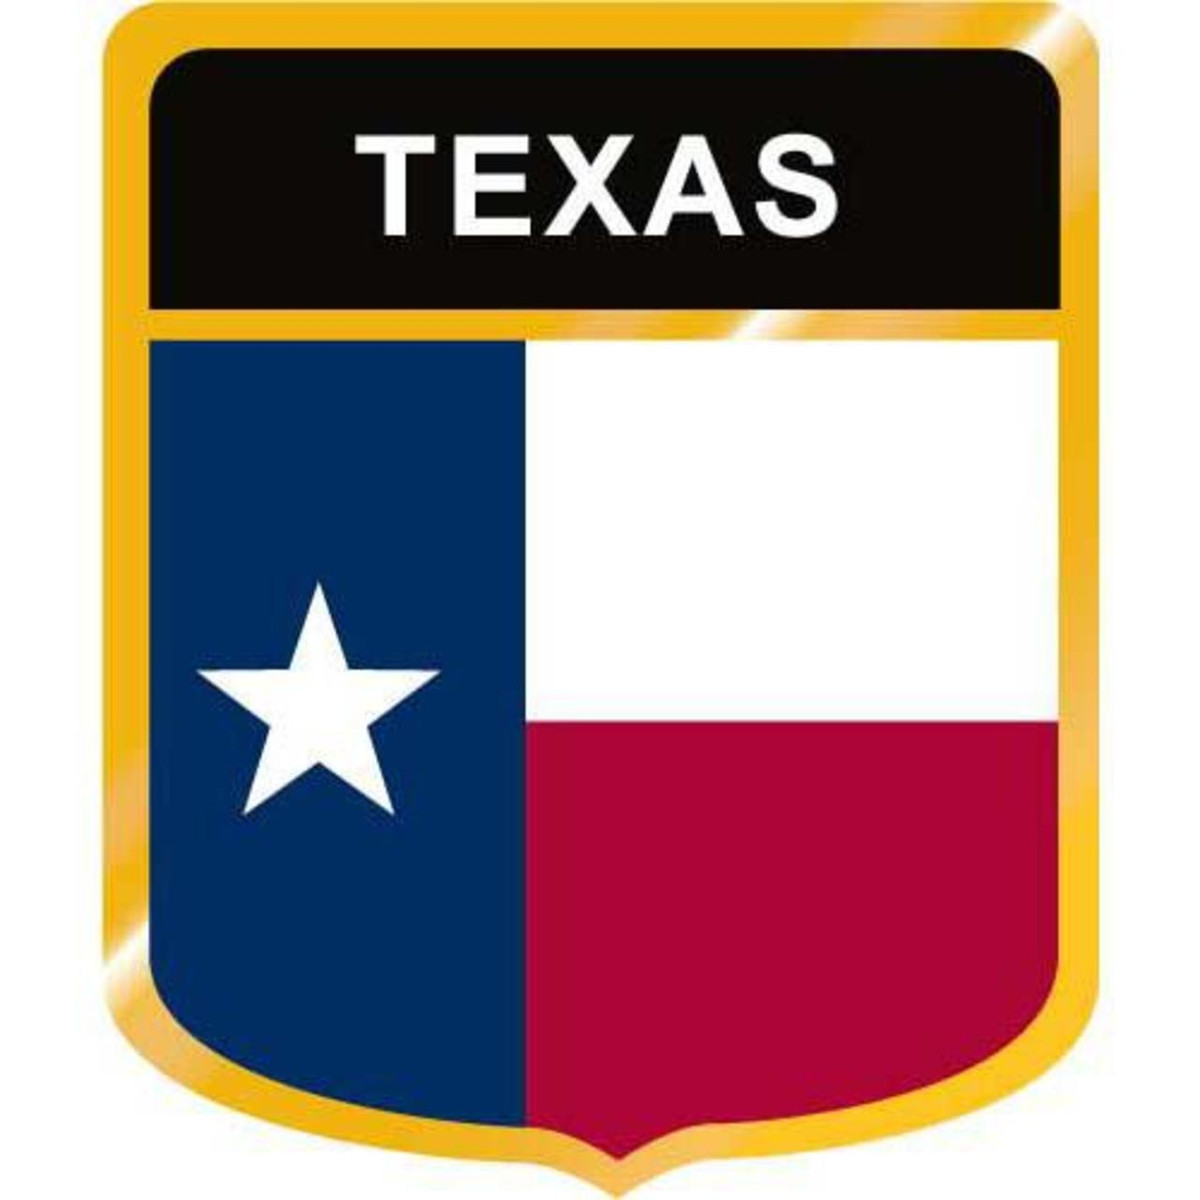 Texas Flags Vector Stock Illustration Download Image Now Texas